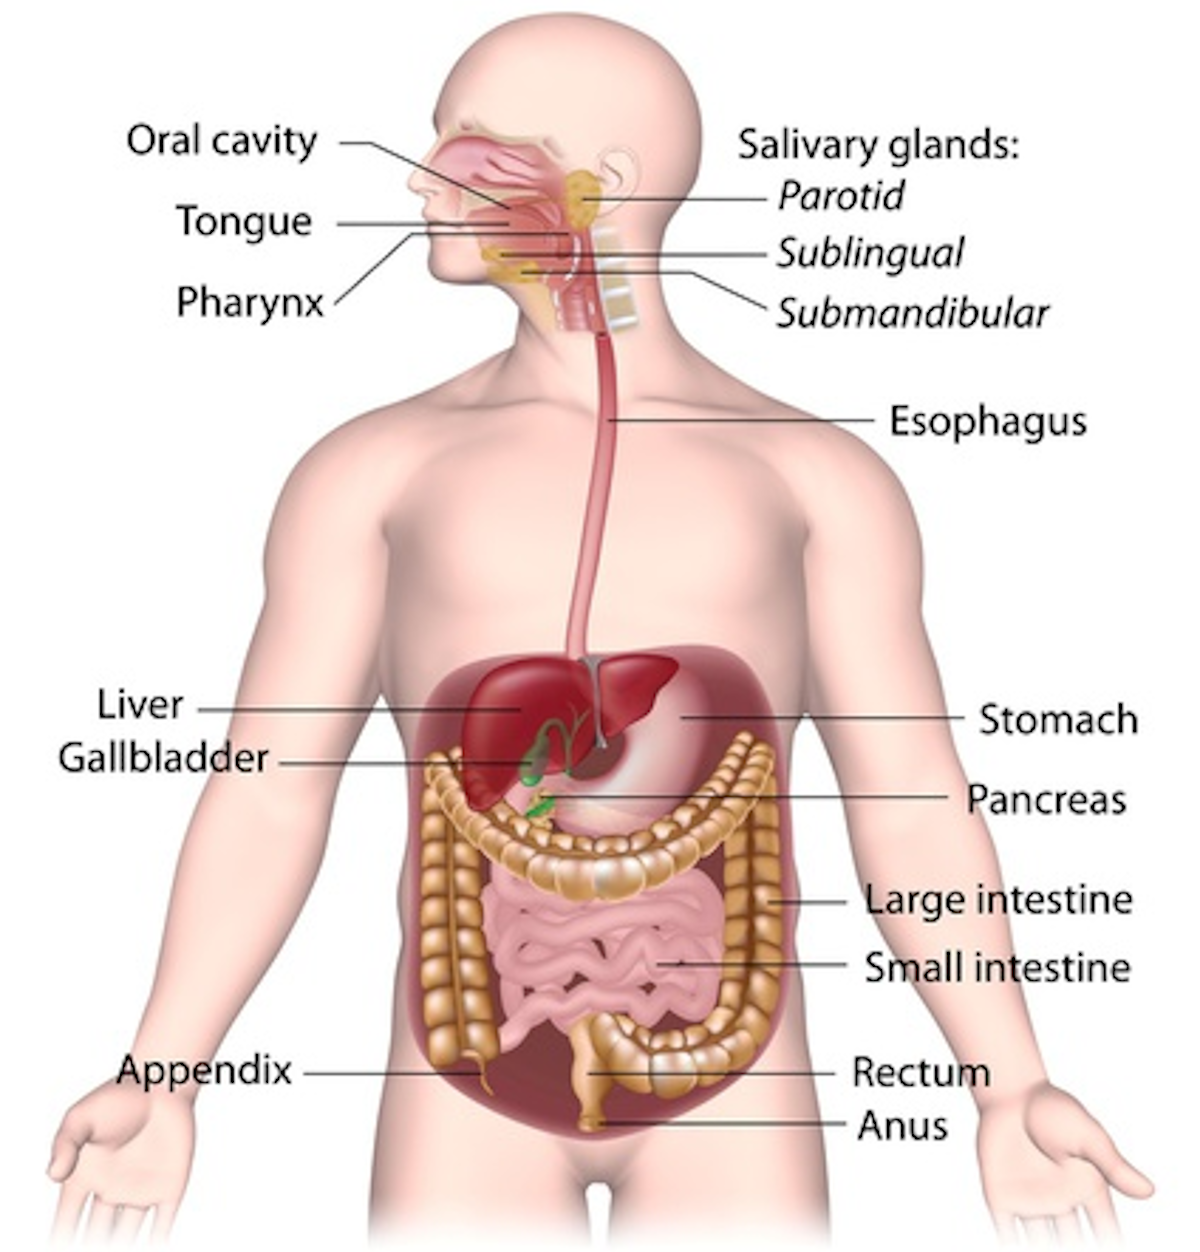 Anatomy and physiology of the digestive system without food